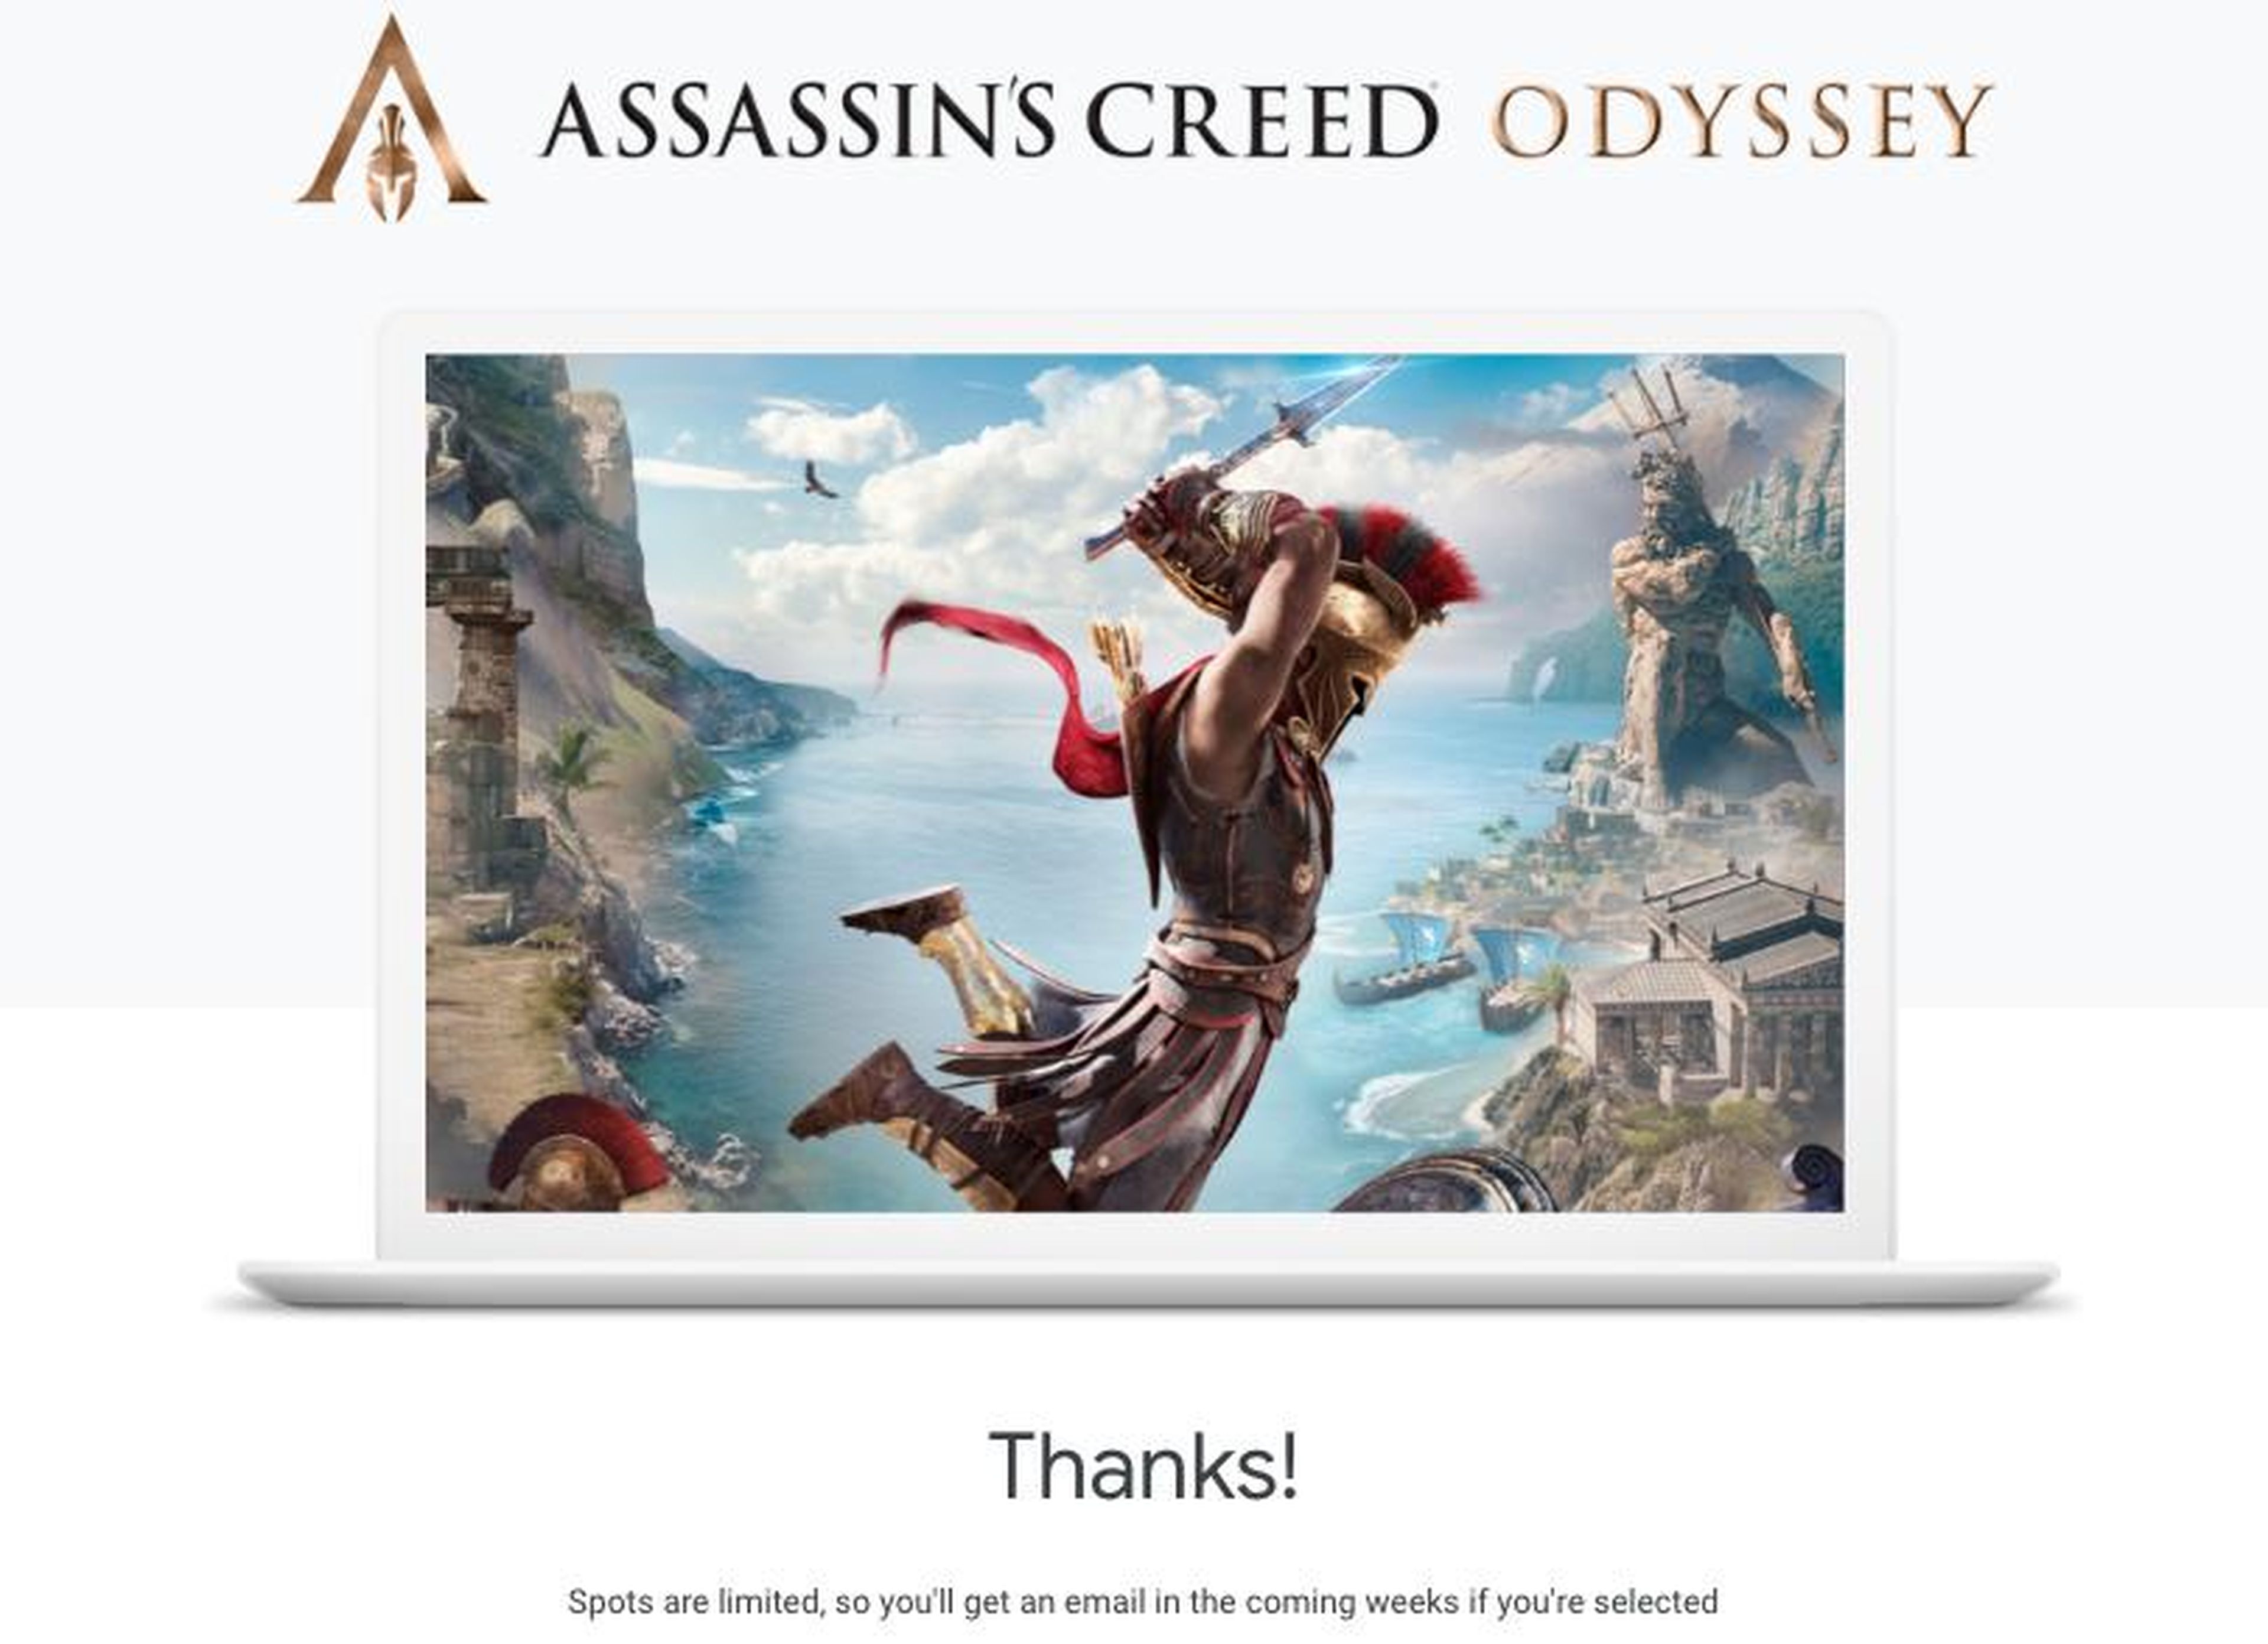 Google's Project Stream enabled beta testers to try running "Assassin's Creed Odyssey" from within a browser window.